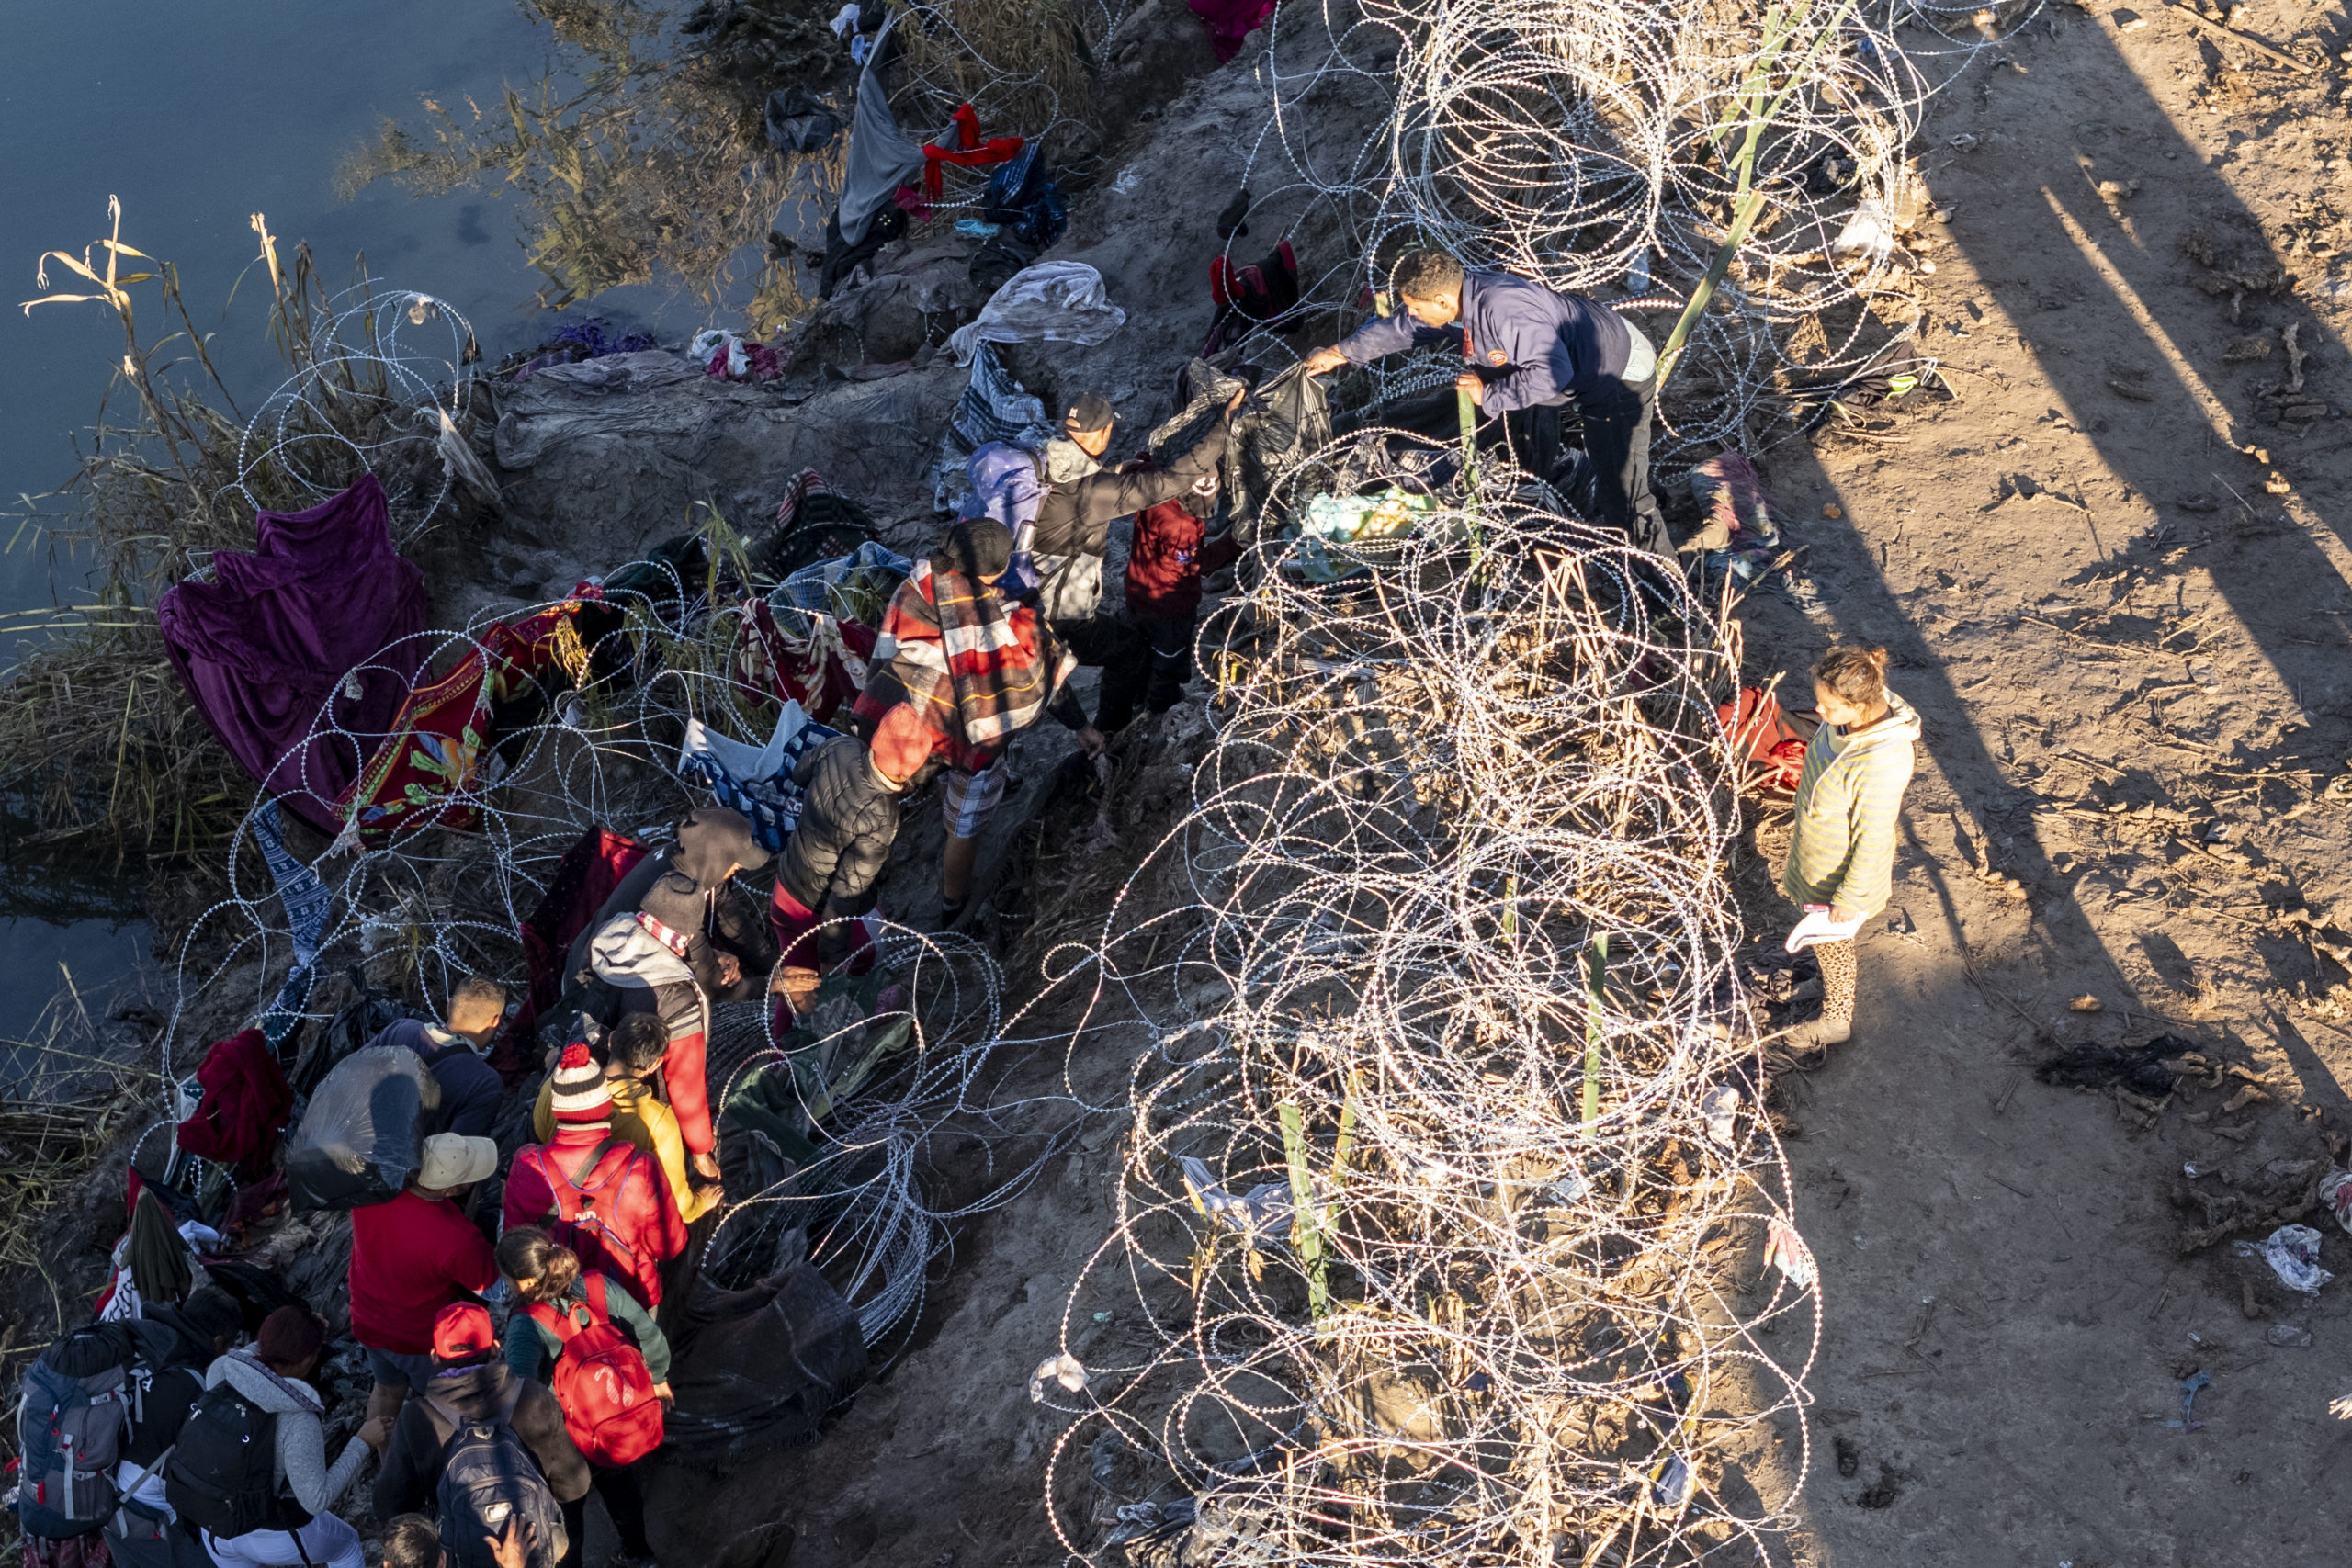 EAGLE PASS, TEXAS - DECEMBER 18: As seen from an aerial view immigrants climb through razor wire after crossing the Rio Grande from Mexico on December 18, 2023 in Eagle Pass, Texas. A surge as many as 12,000 immigrants per day crossing the U.S. southern border has overwhelmed U.S. immigration authorities in recent weeks. (Photo by John Moore/Getty Images)